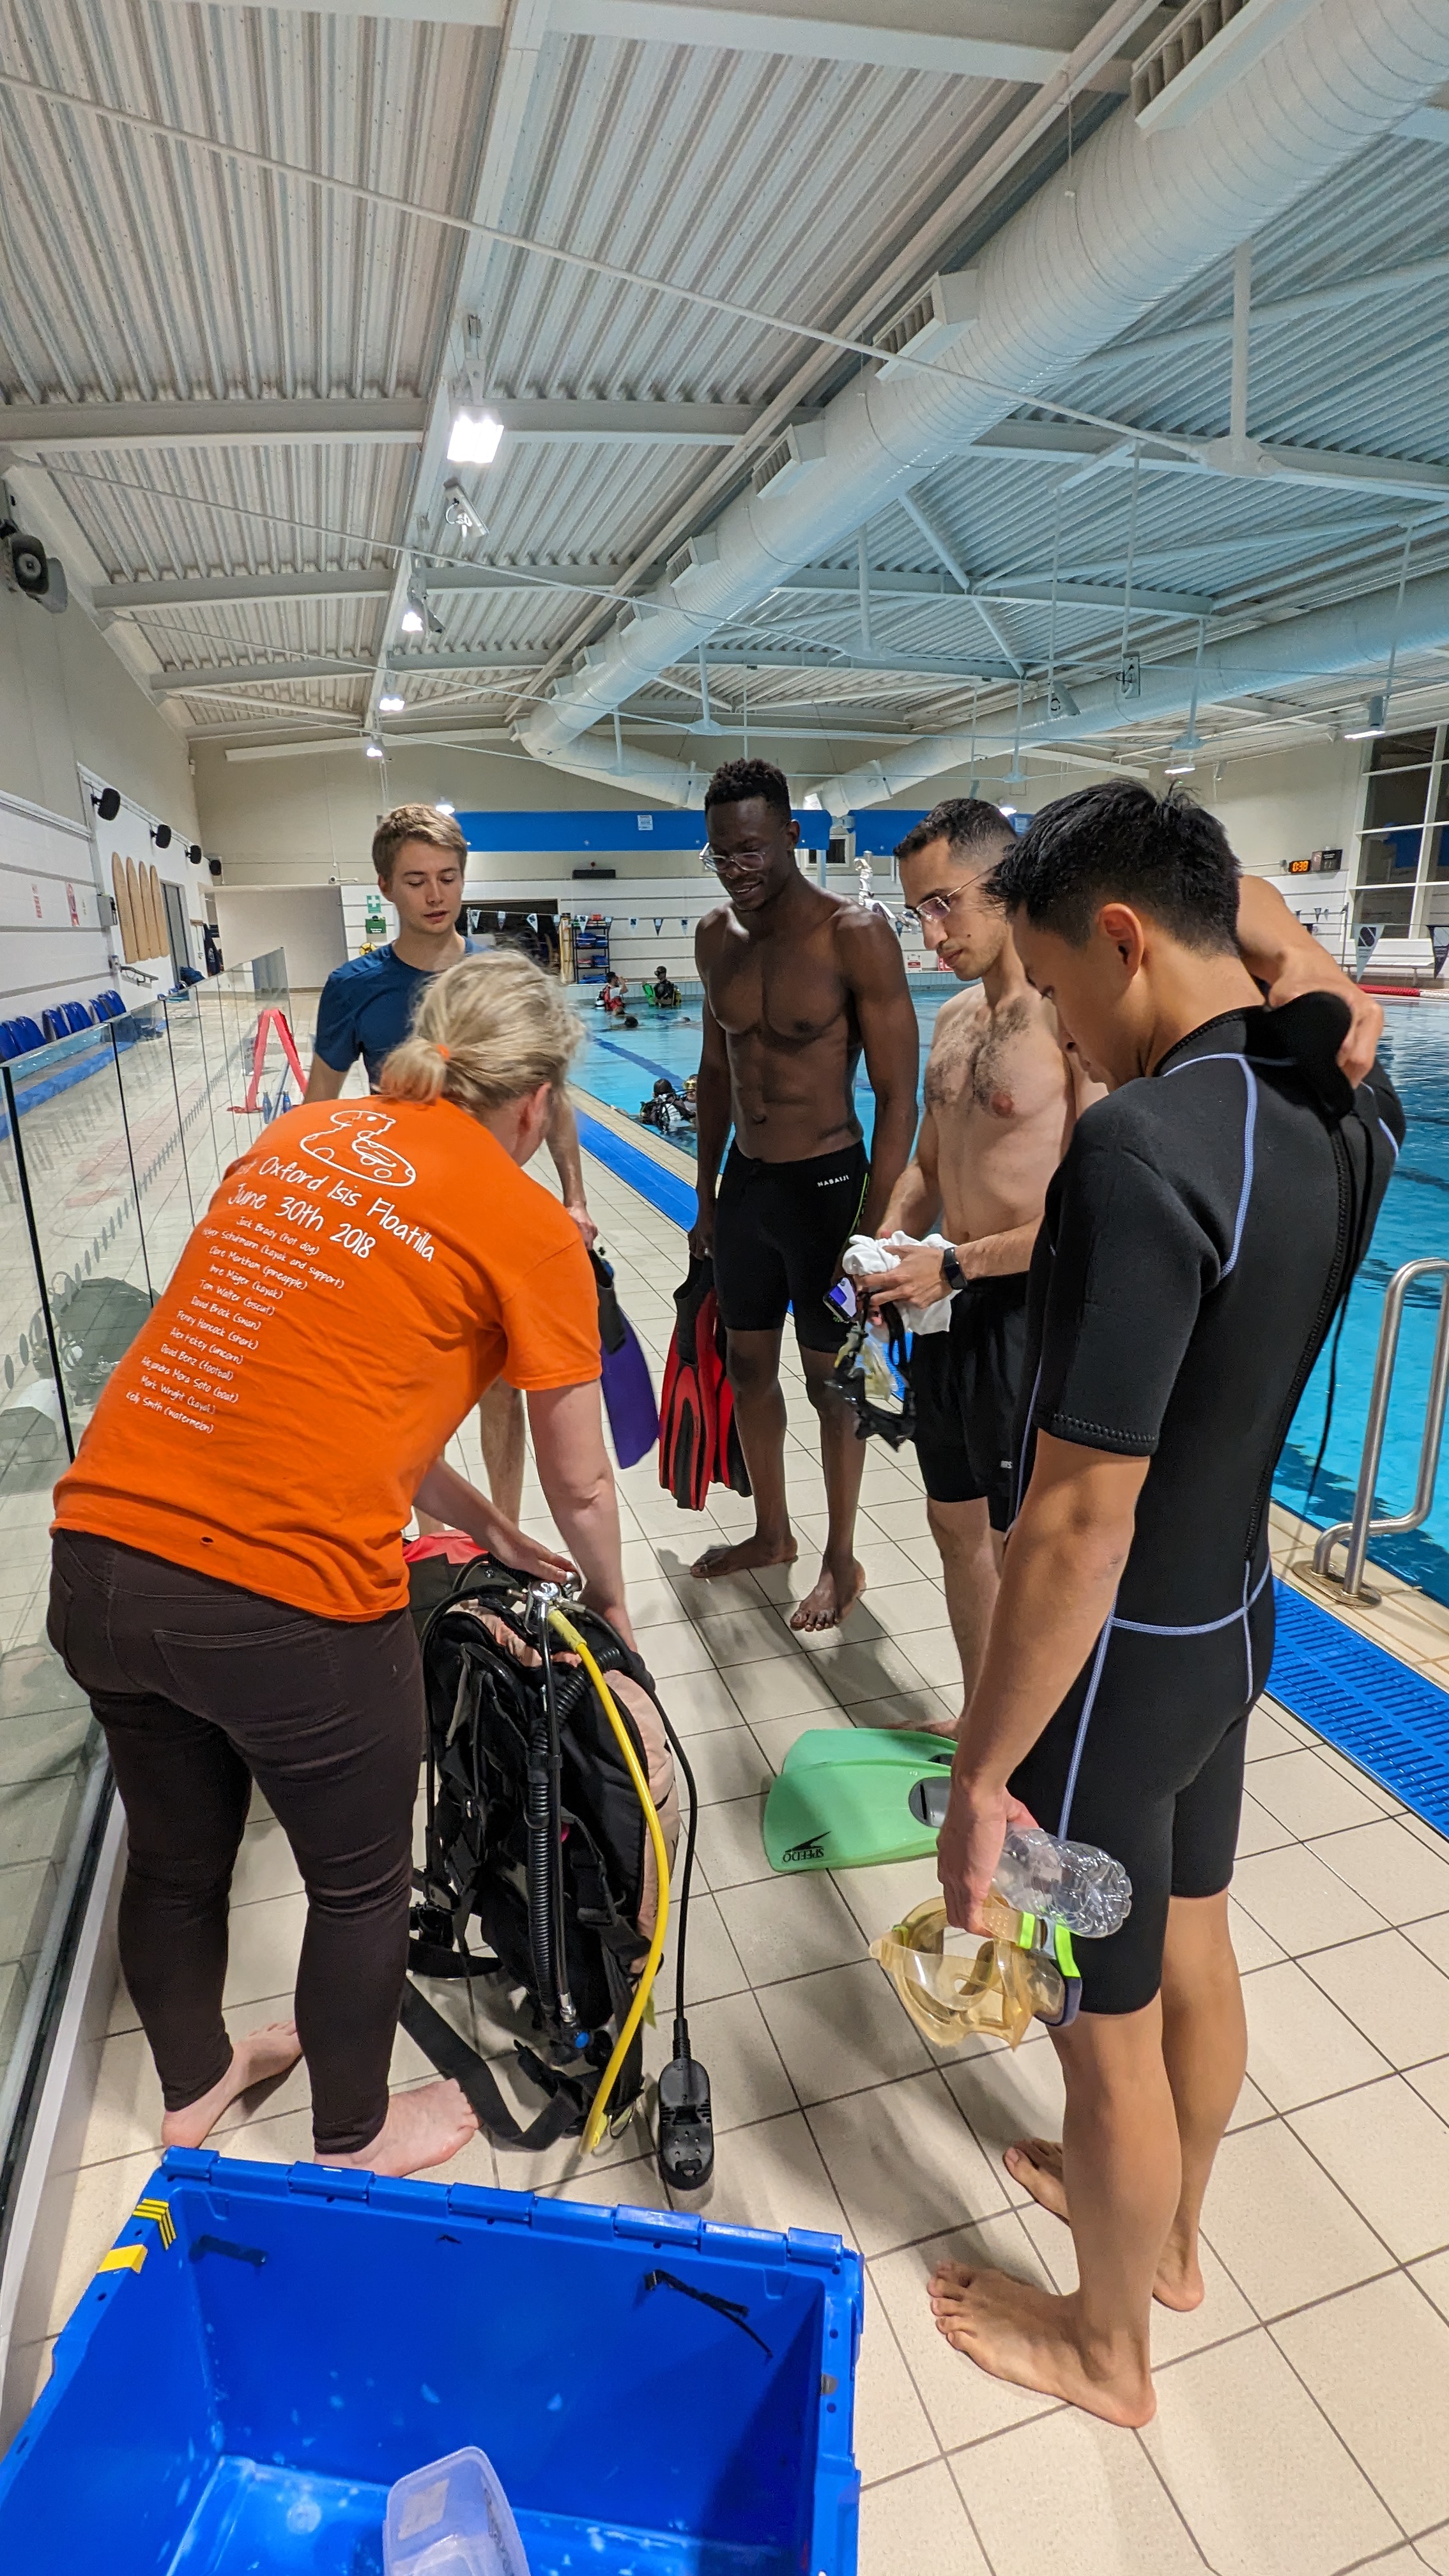 Penny briefing some students for their first diving experience!